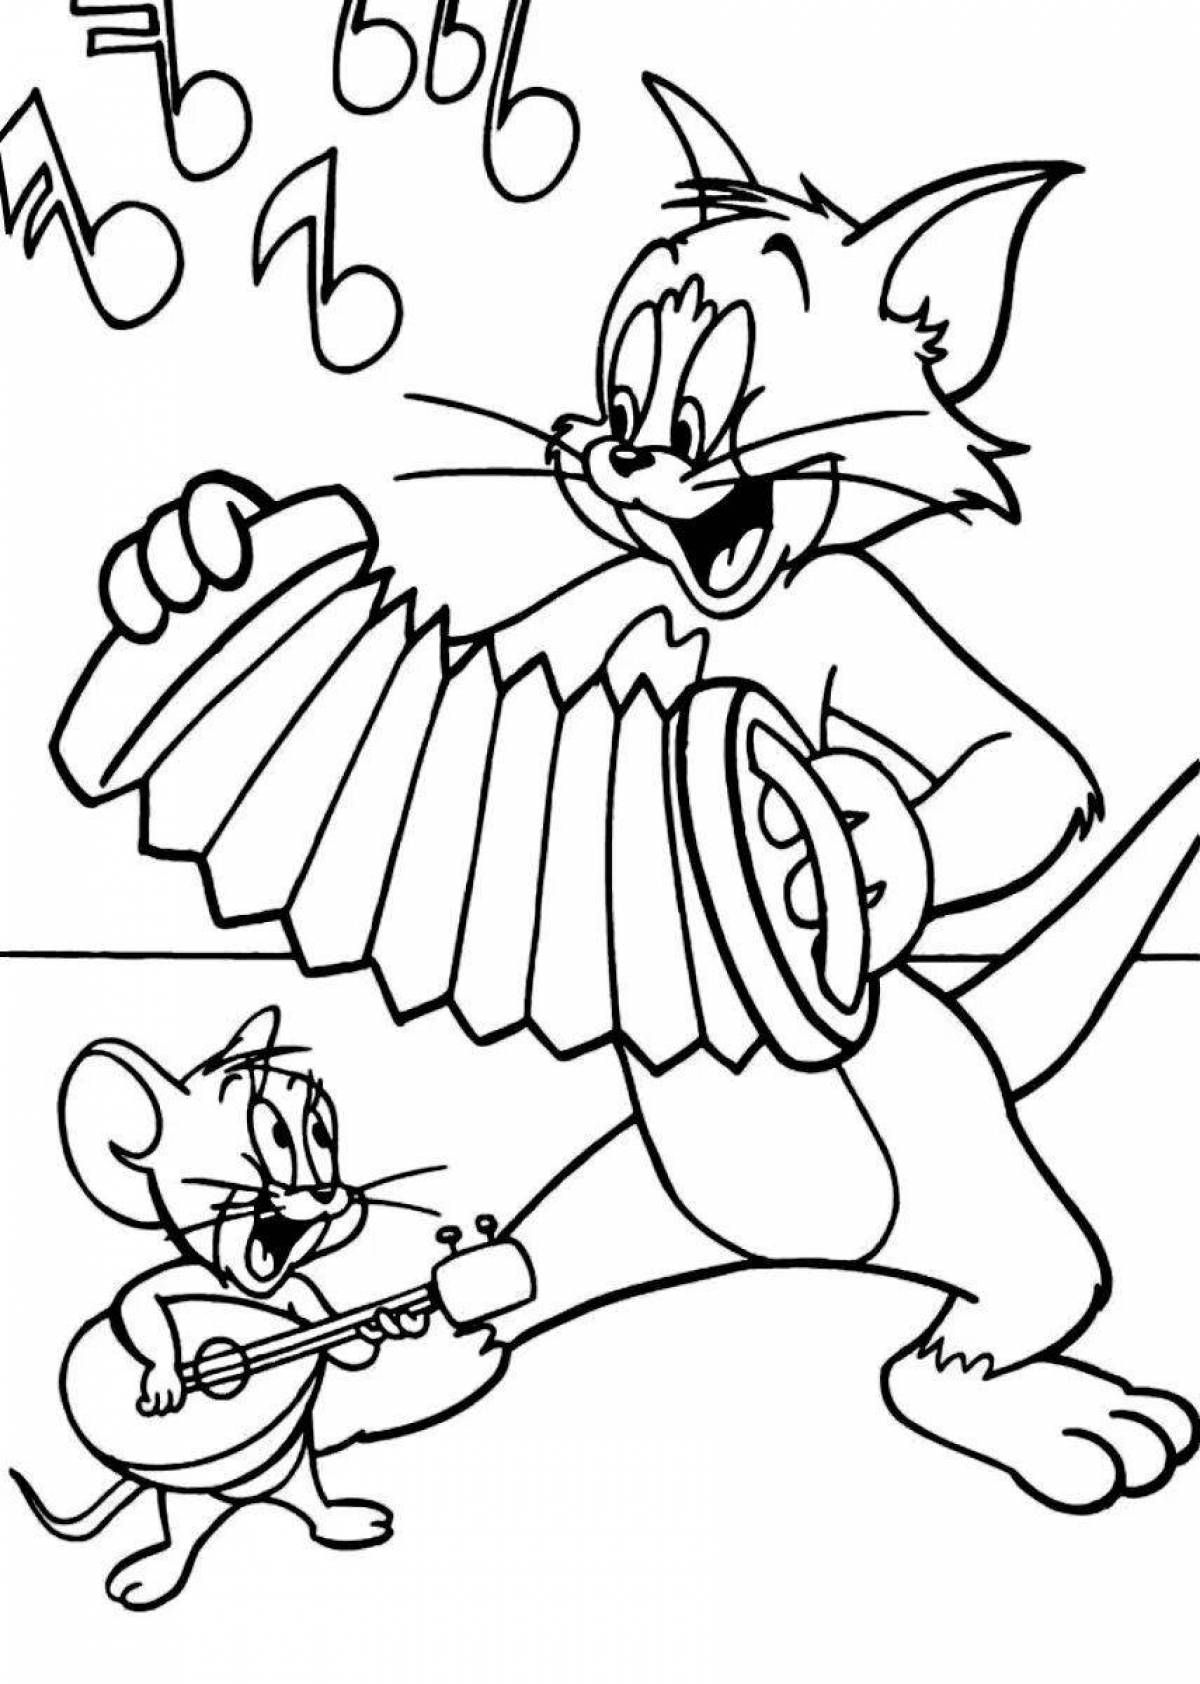 Charming tom and jerry coloring book